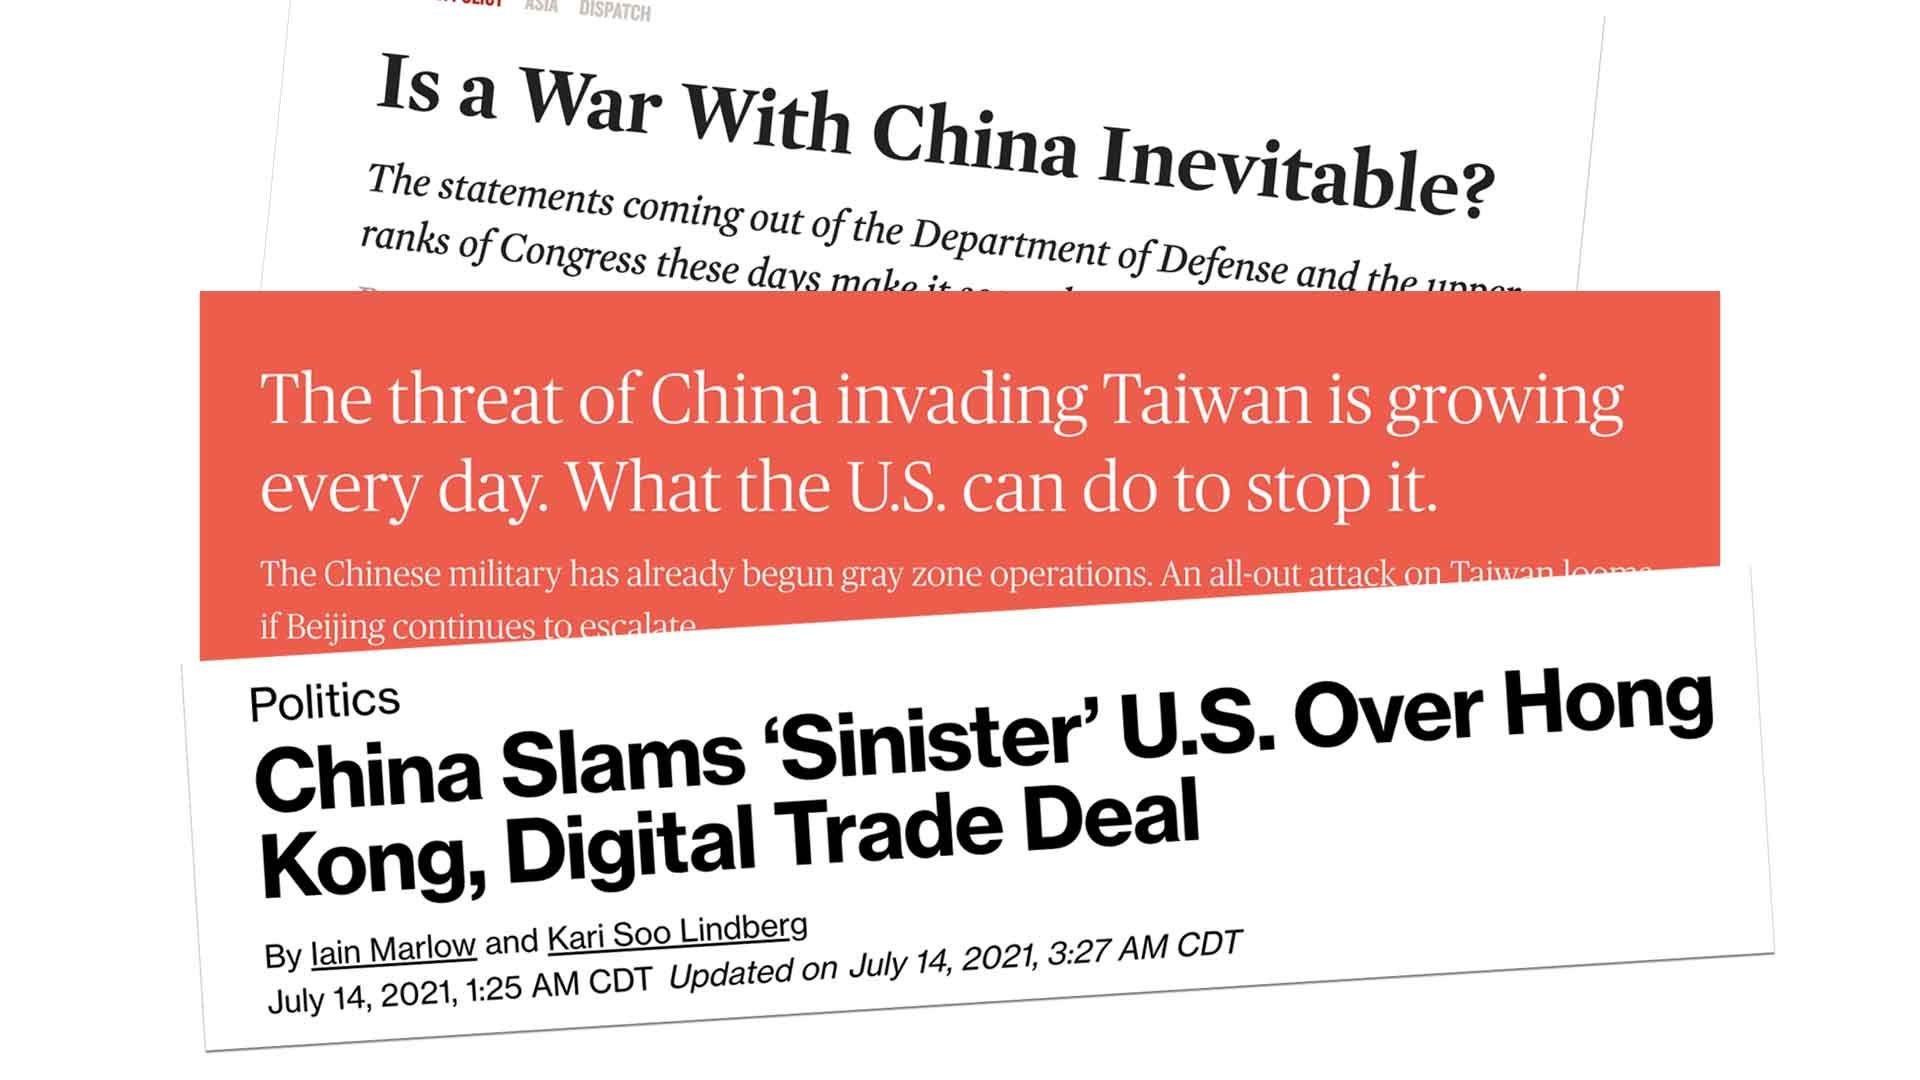 Alarming headlines about US-China relations. 